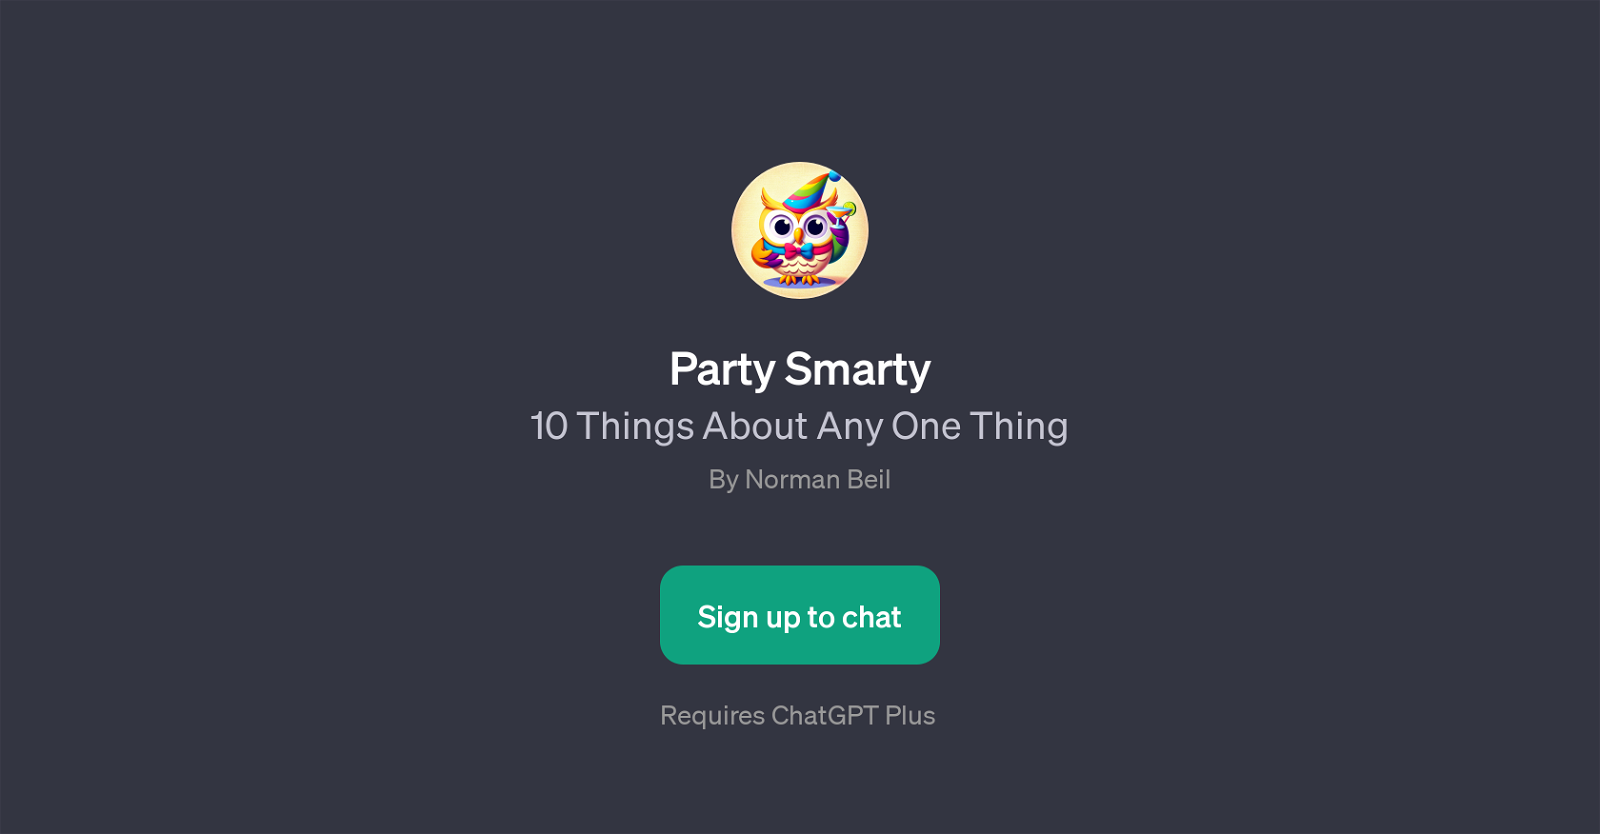 Party Smarty website